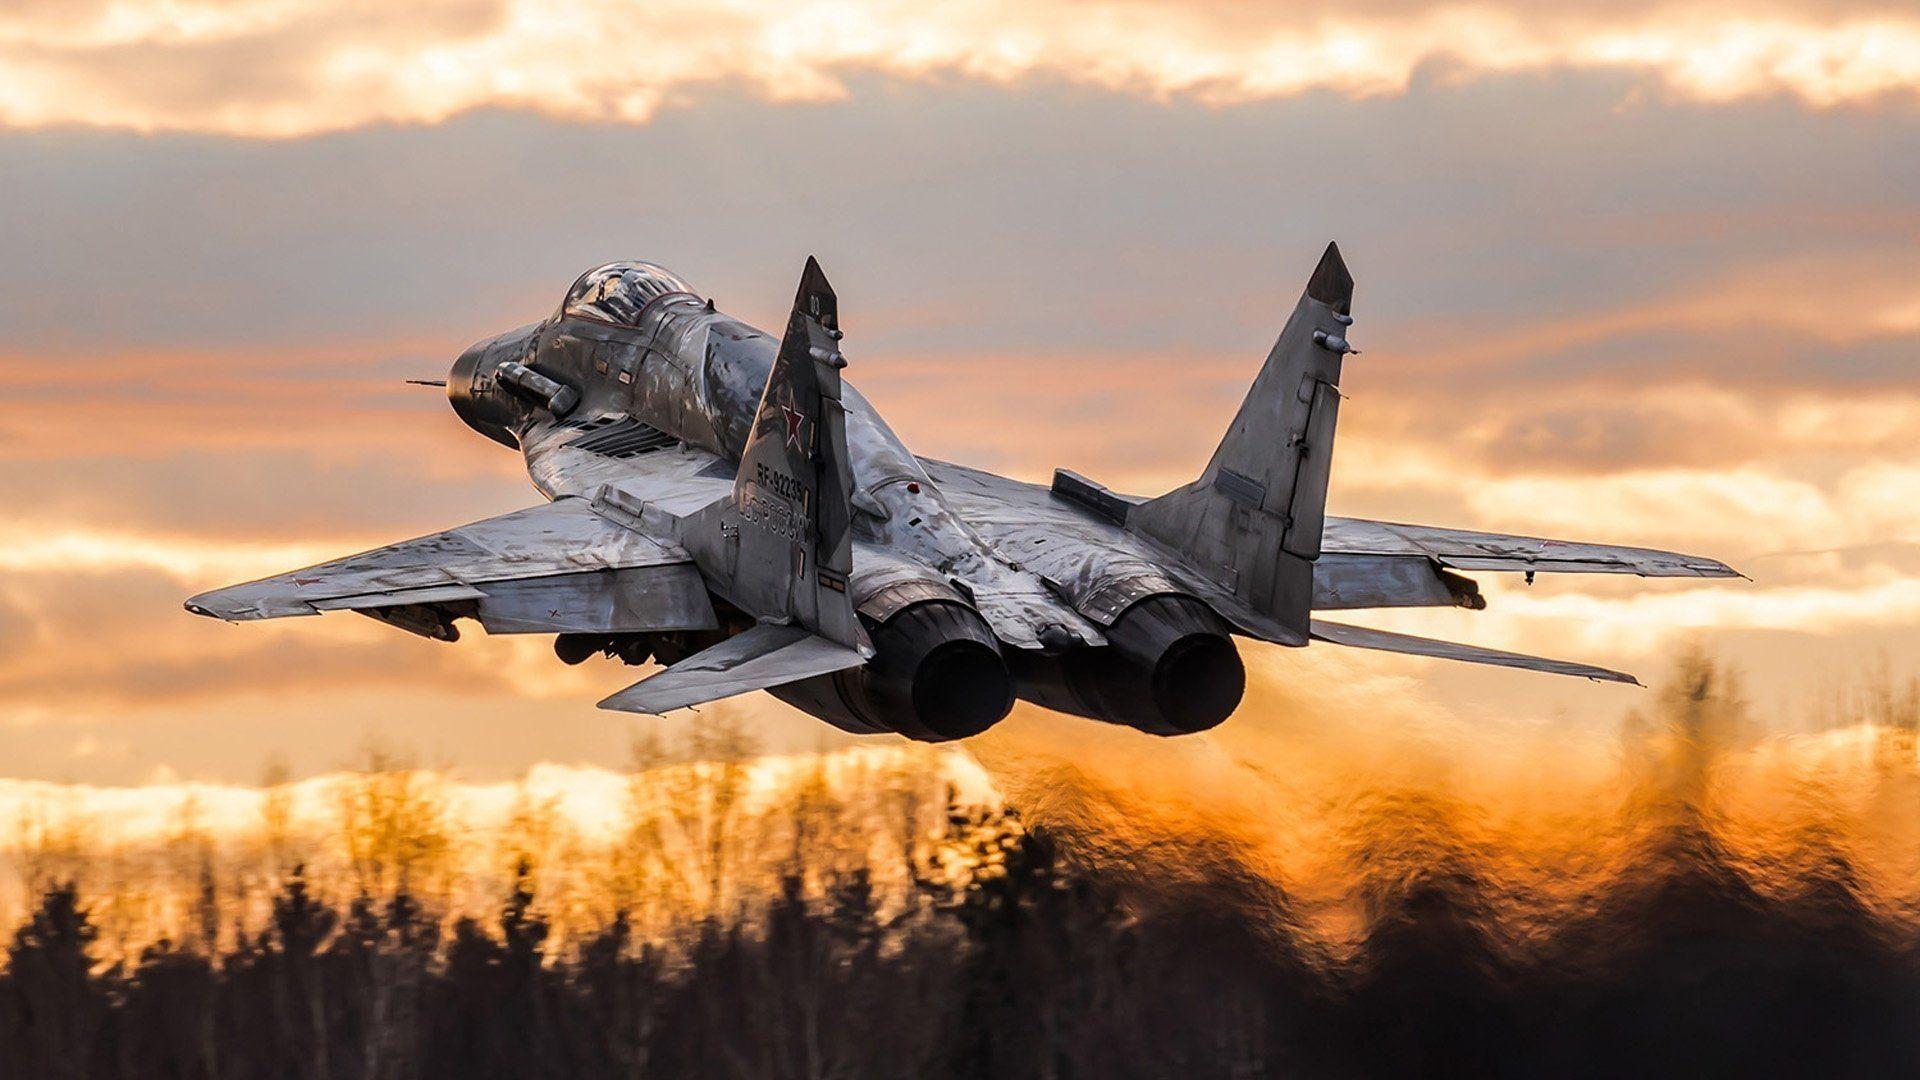 Mig 29 Wallpapers Top Free Mig 29 Backgrounds Wallpaperaccess Images, Photos, Reviews